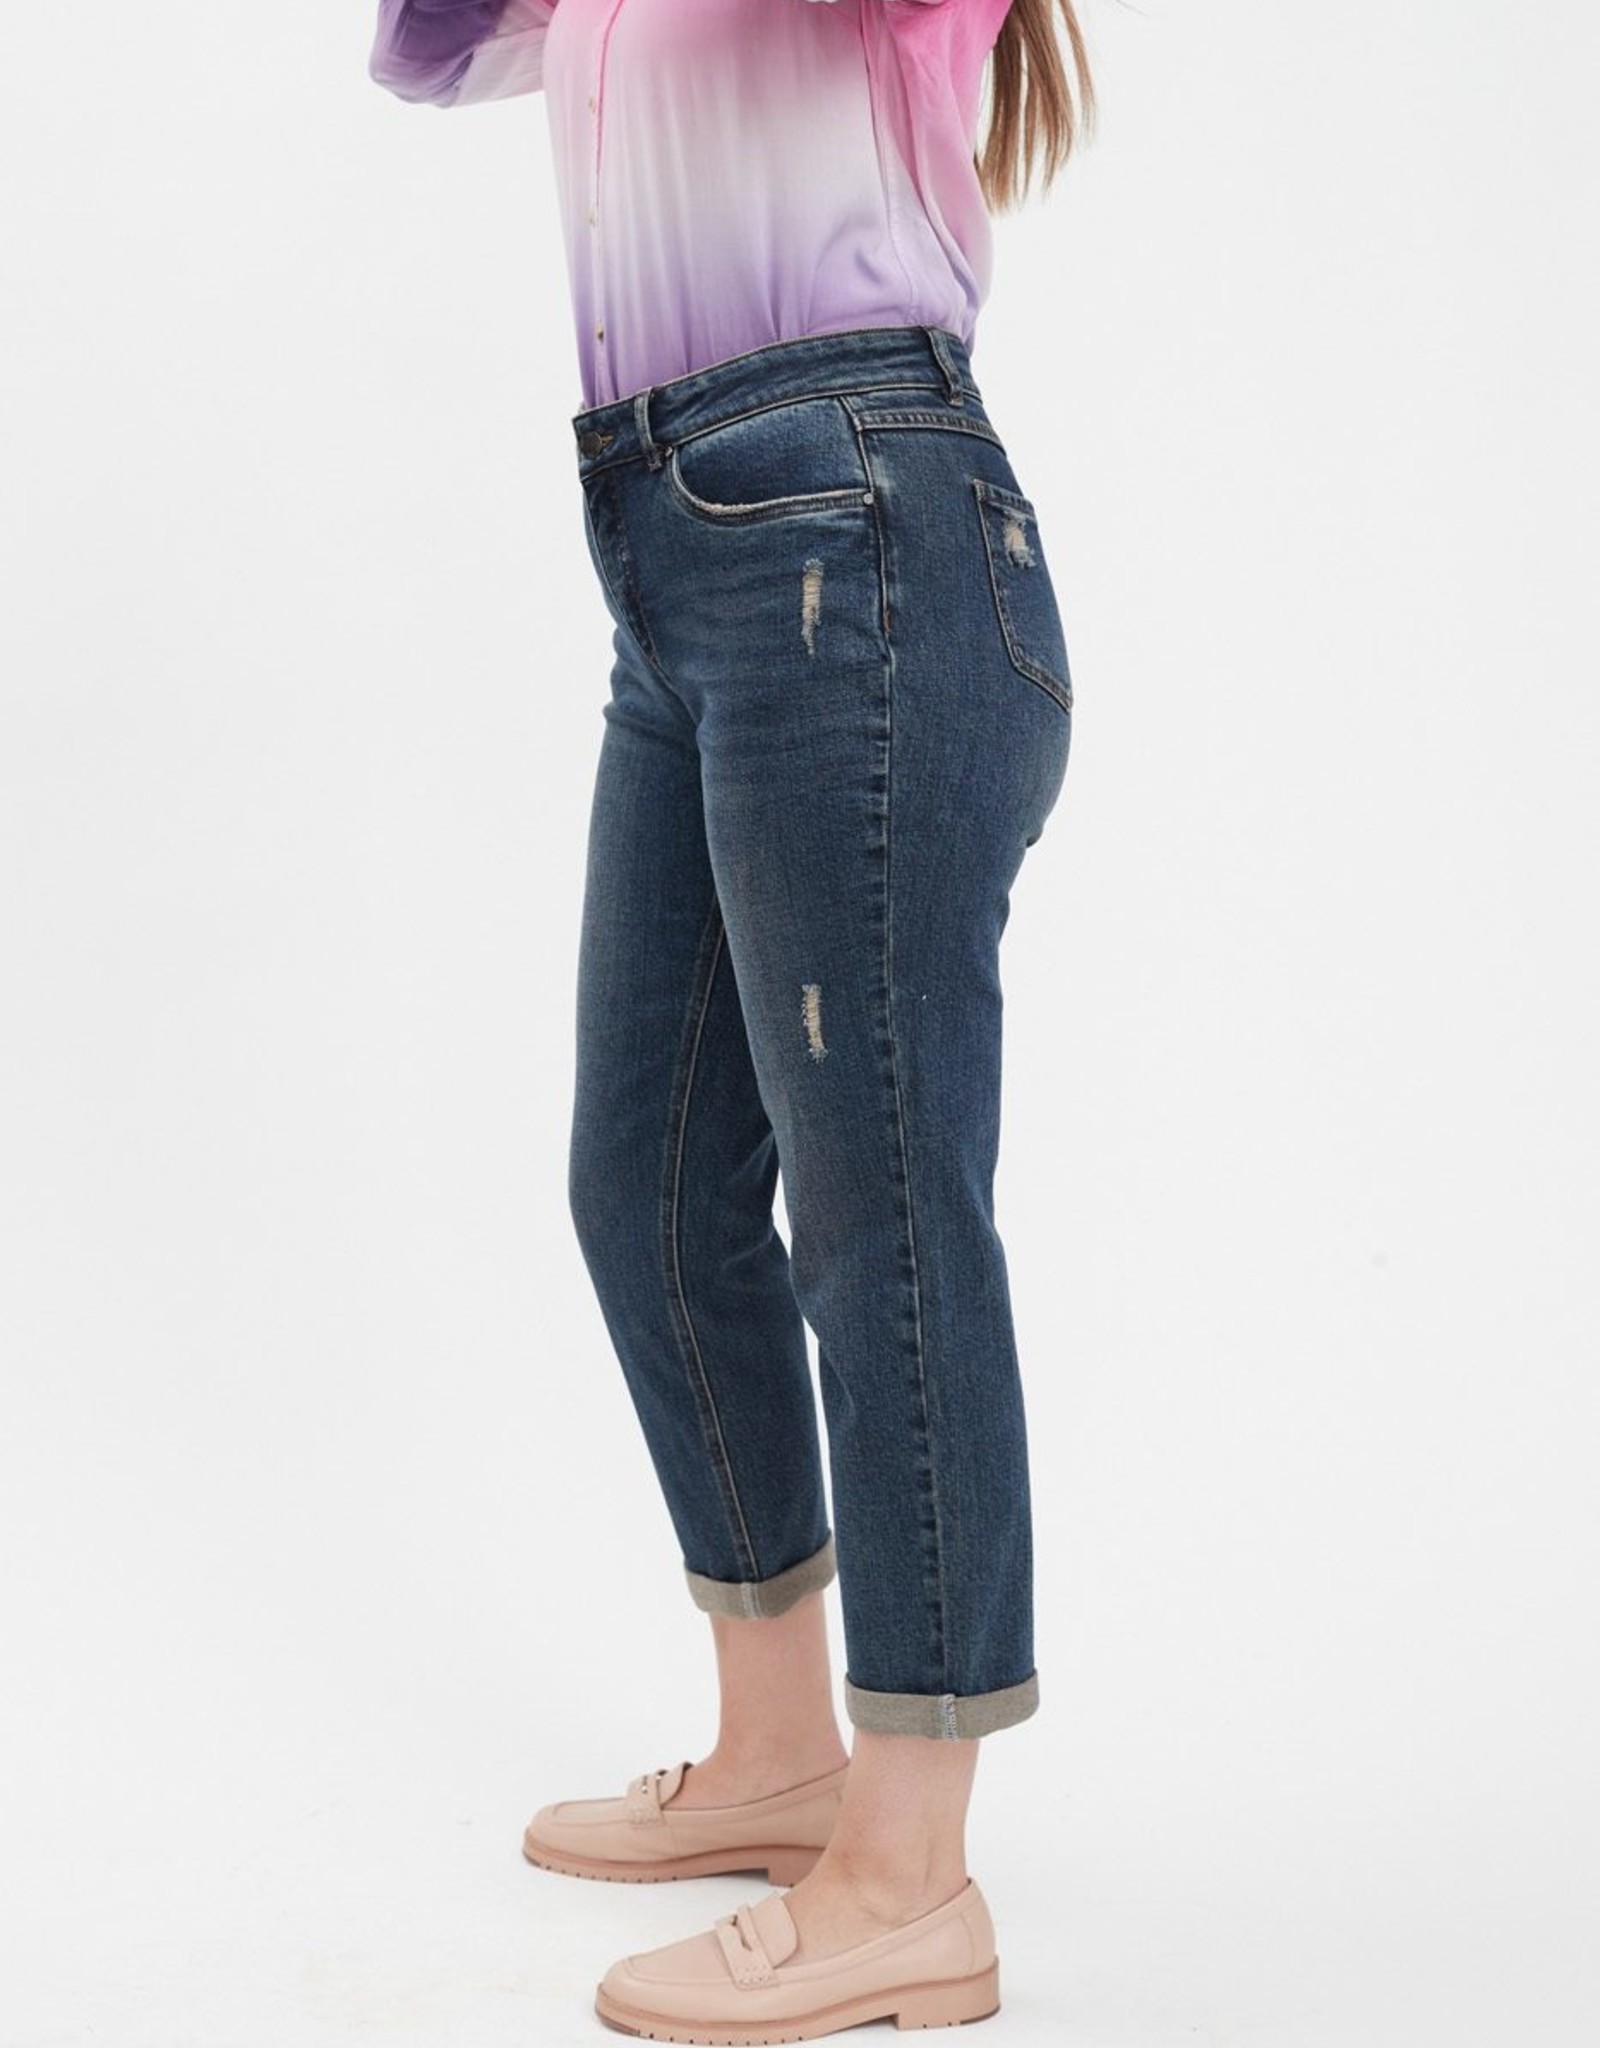 French Dressing Jeans FDJ 2306835 Girlfriend Jean with Rolled up Hem